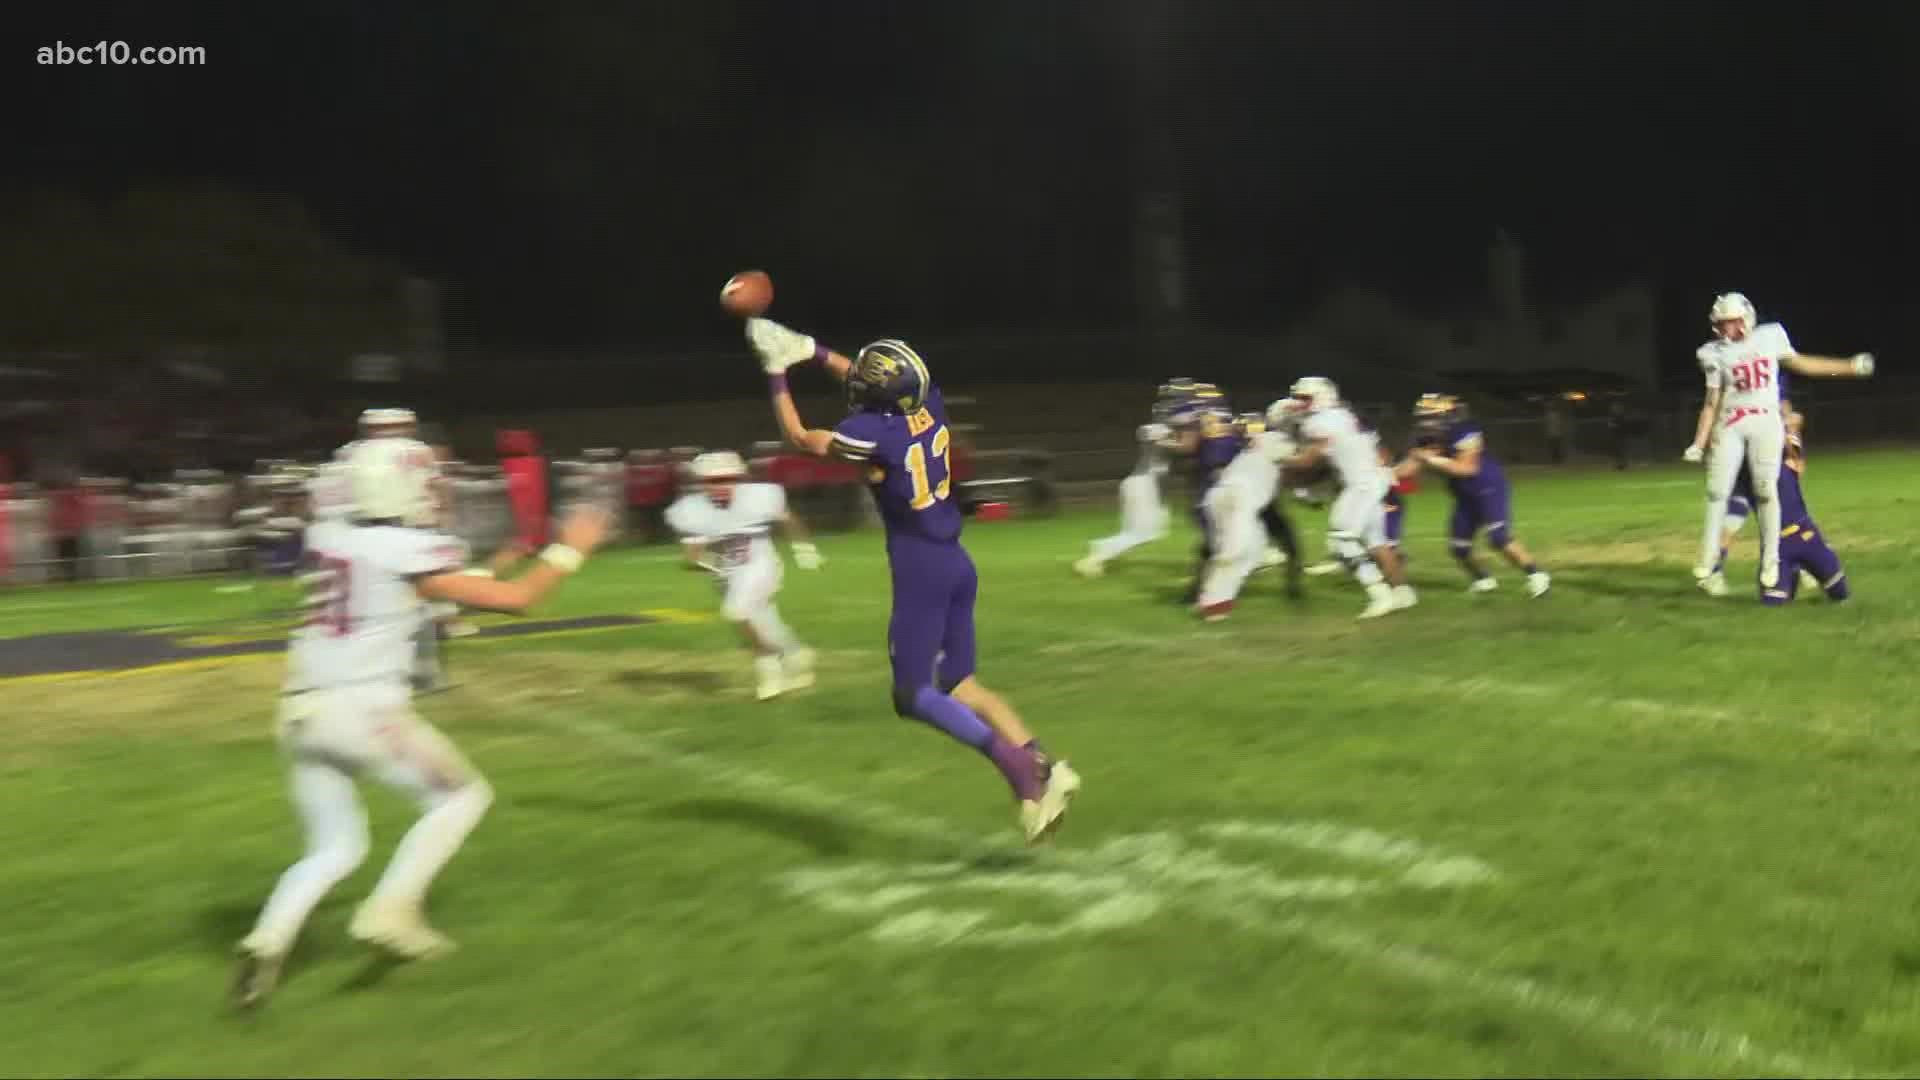 ABC10's Kevin John brings you another week of high school football highlights.